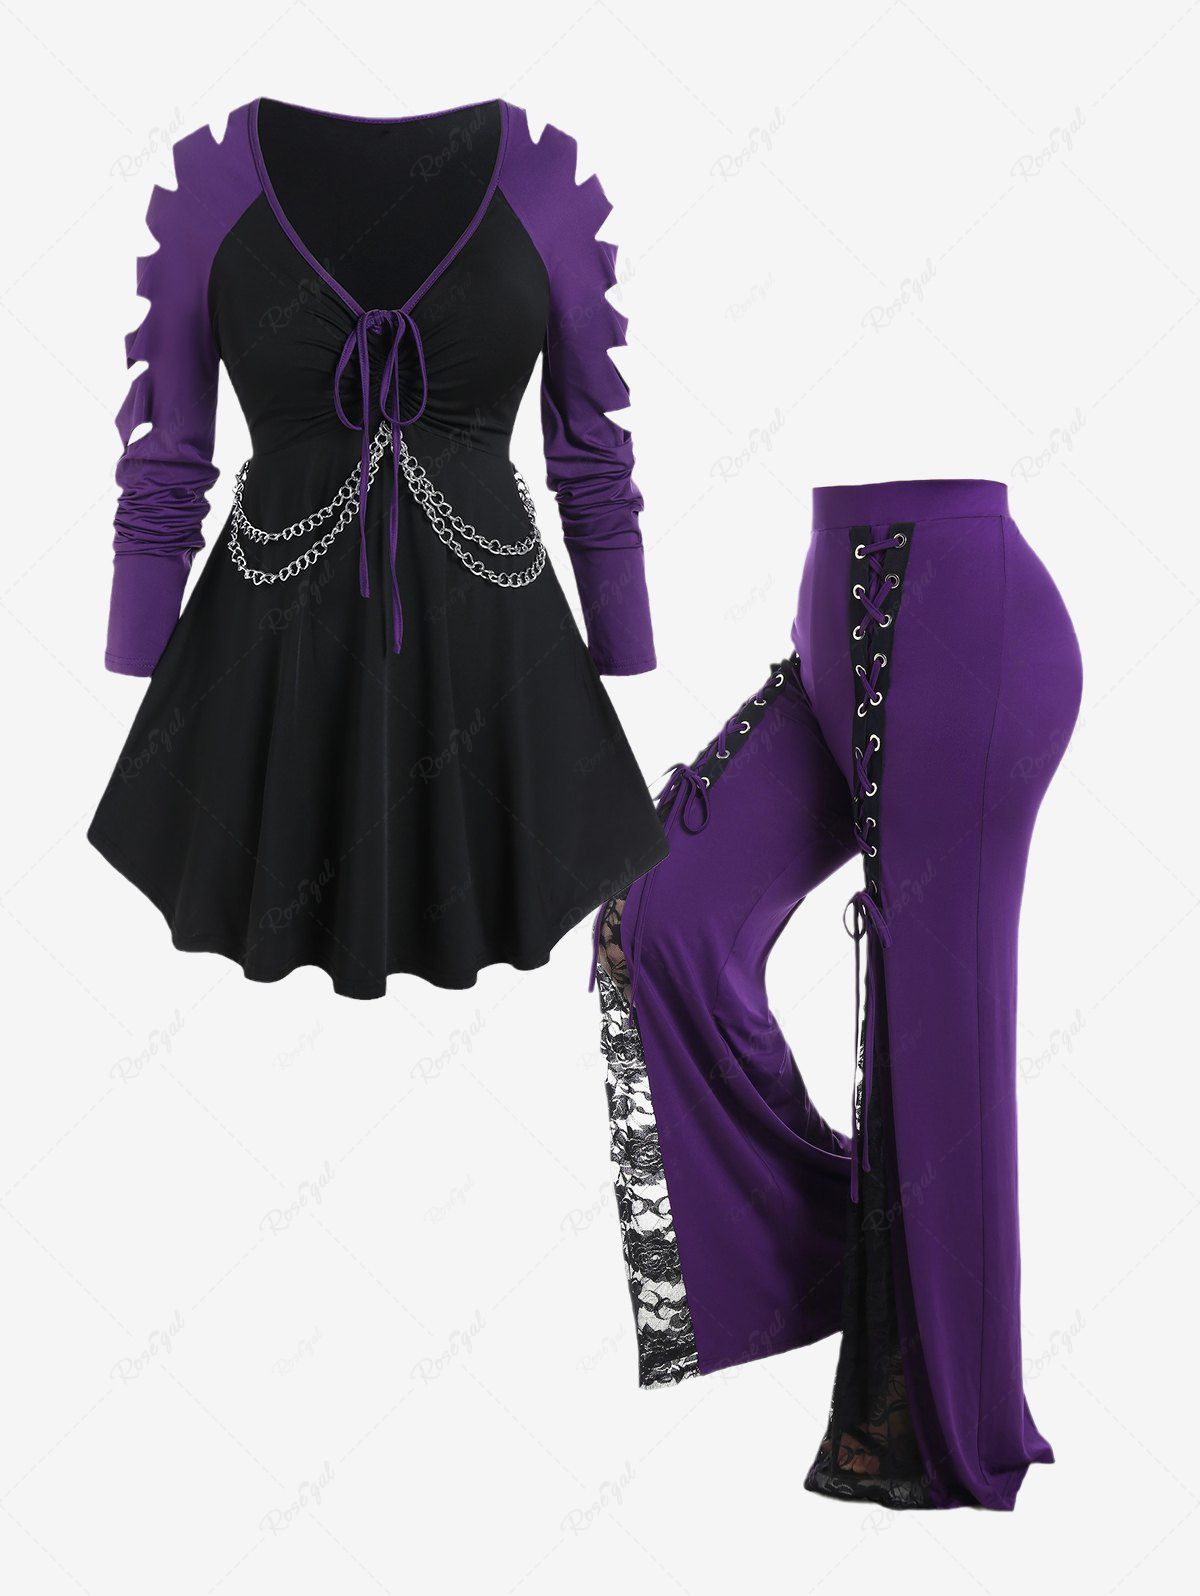 New Ladder Cutout Sleeve Chains Tee and Lace-up Bell Bottom Pants Gothic Outfit  